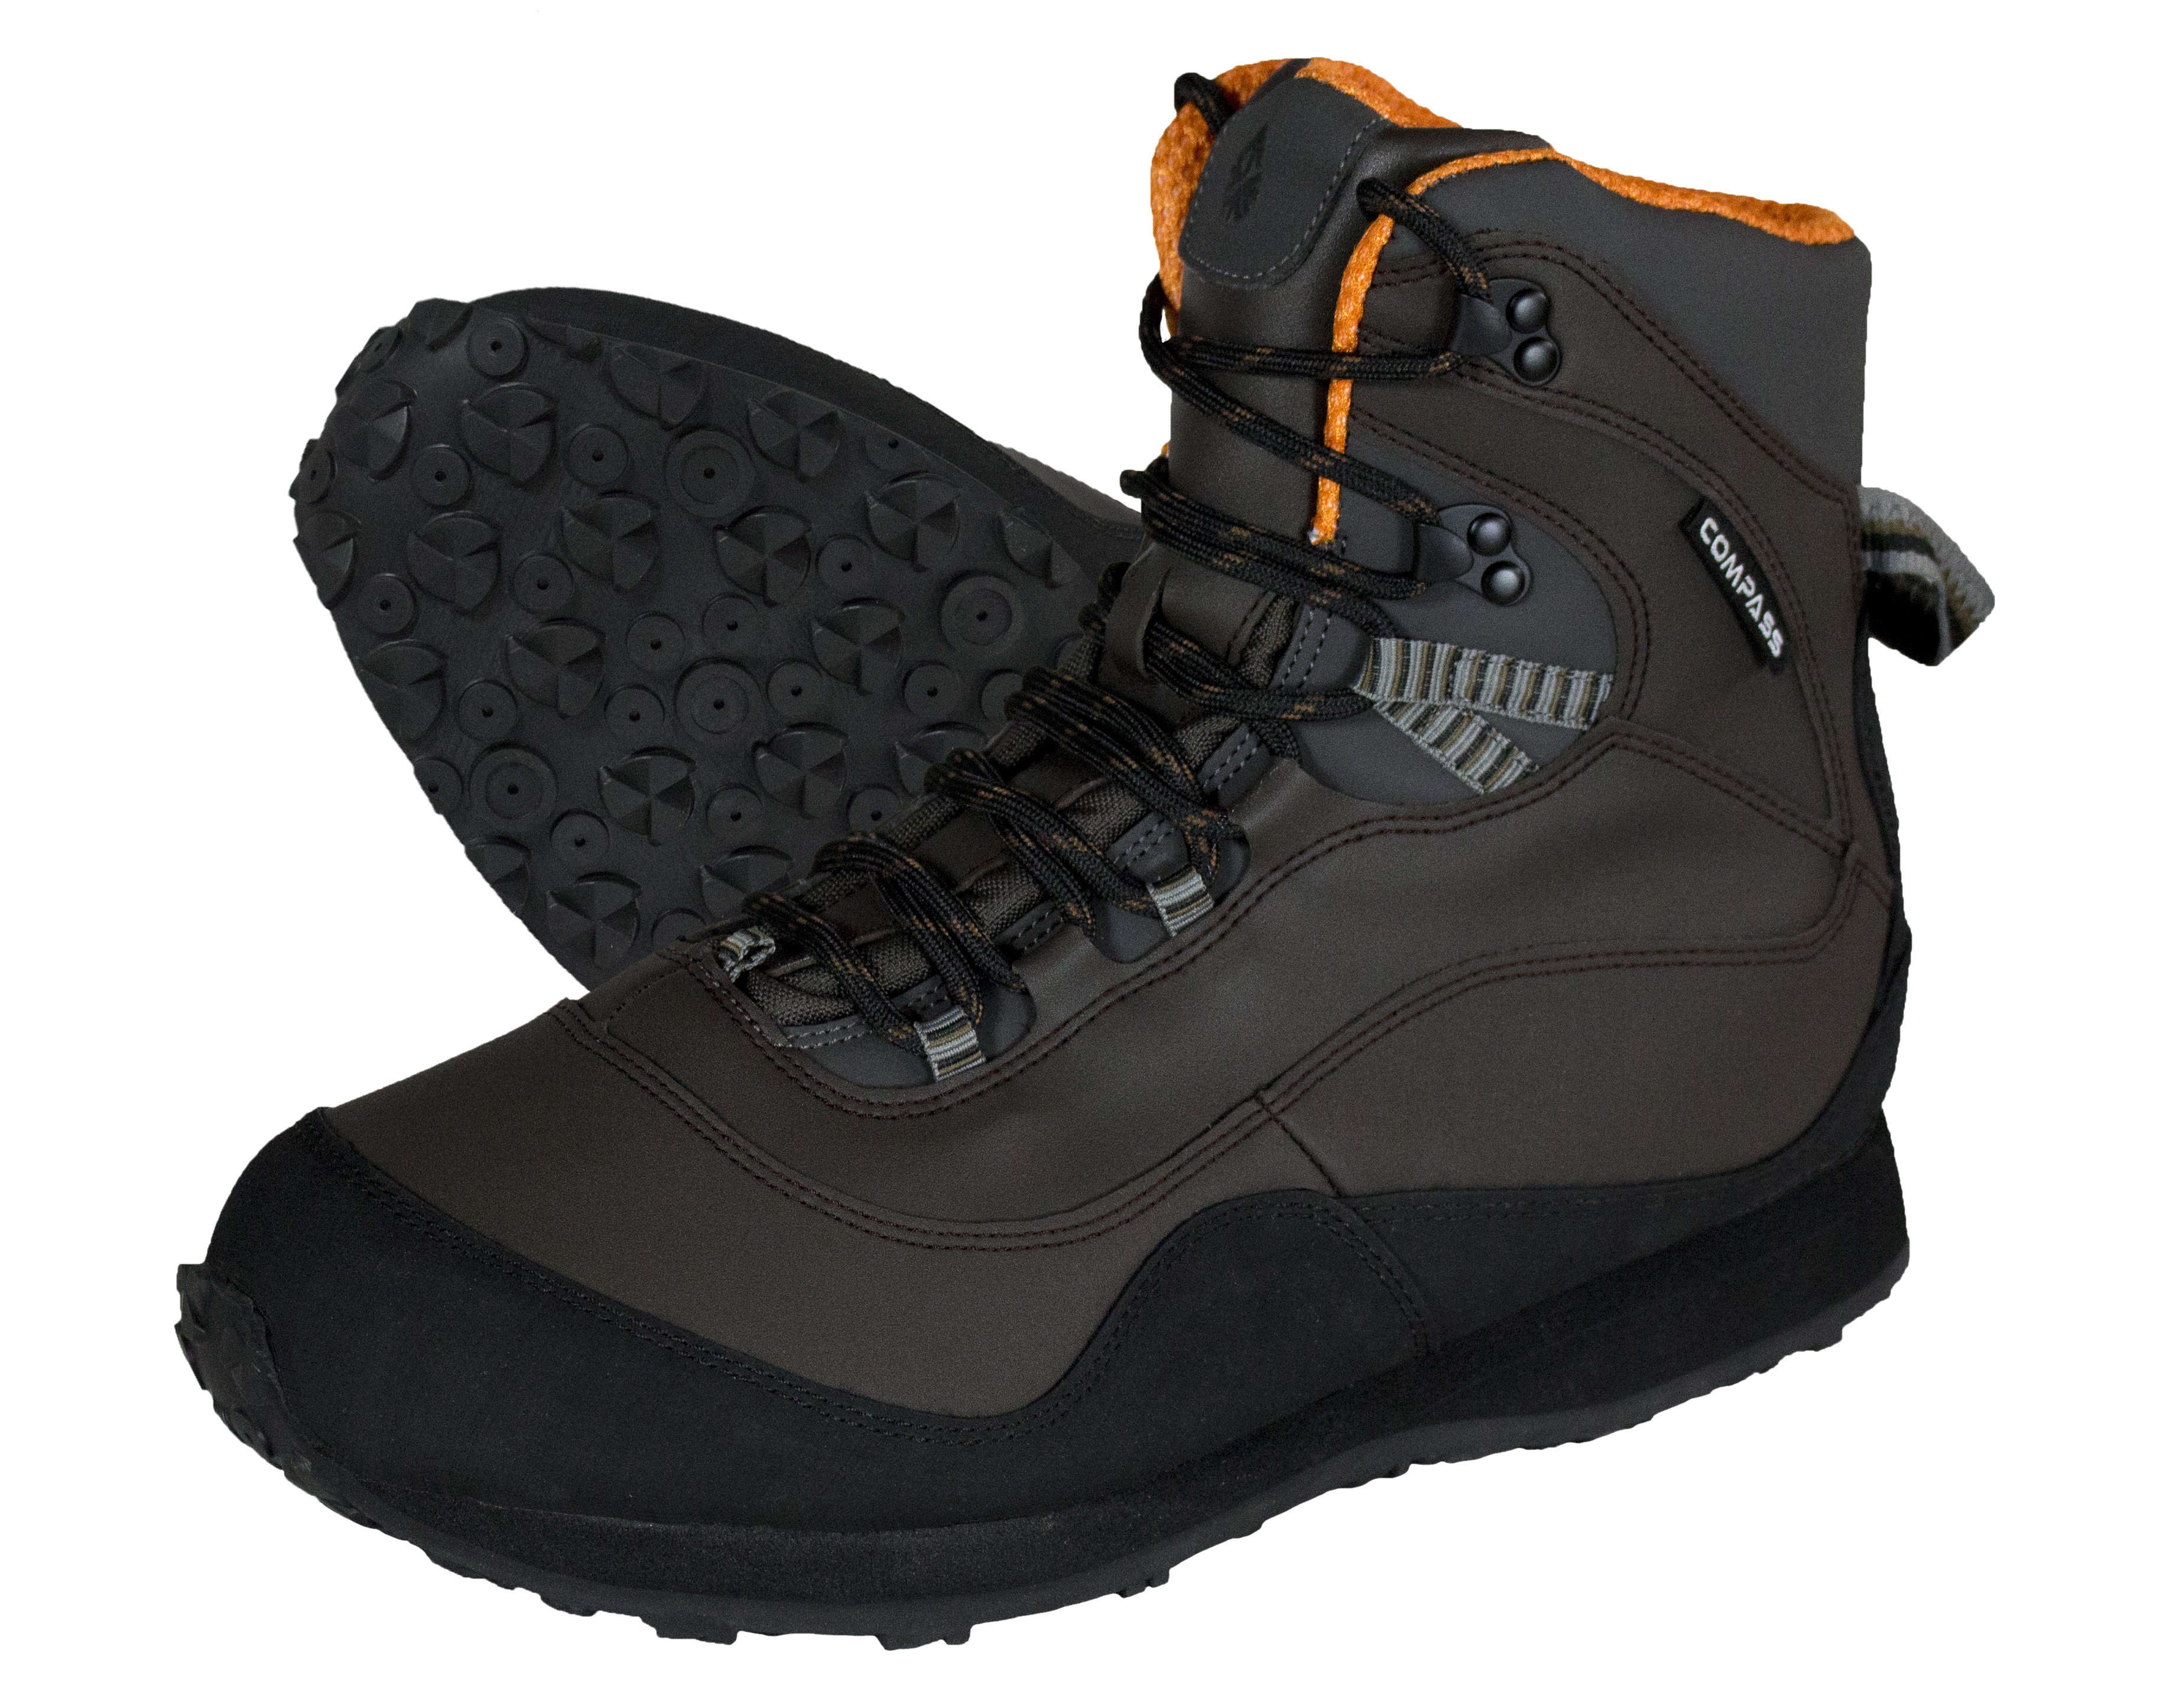 2414350 - Tailwater Cleated Wading Shoe with sole